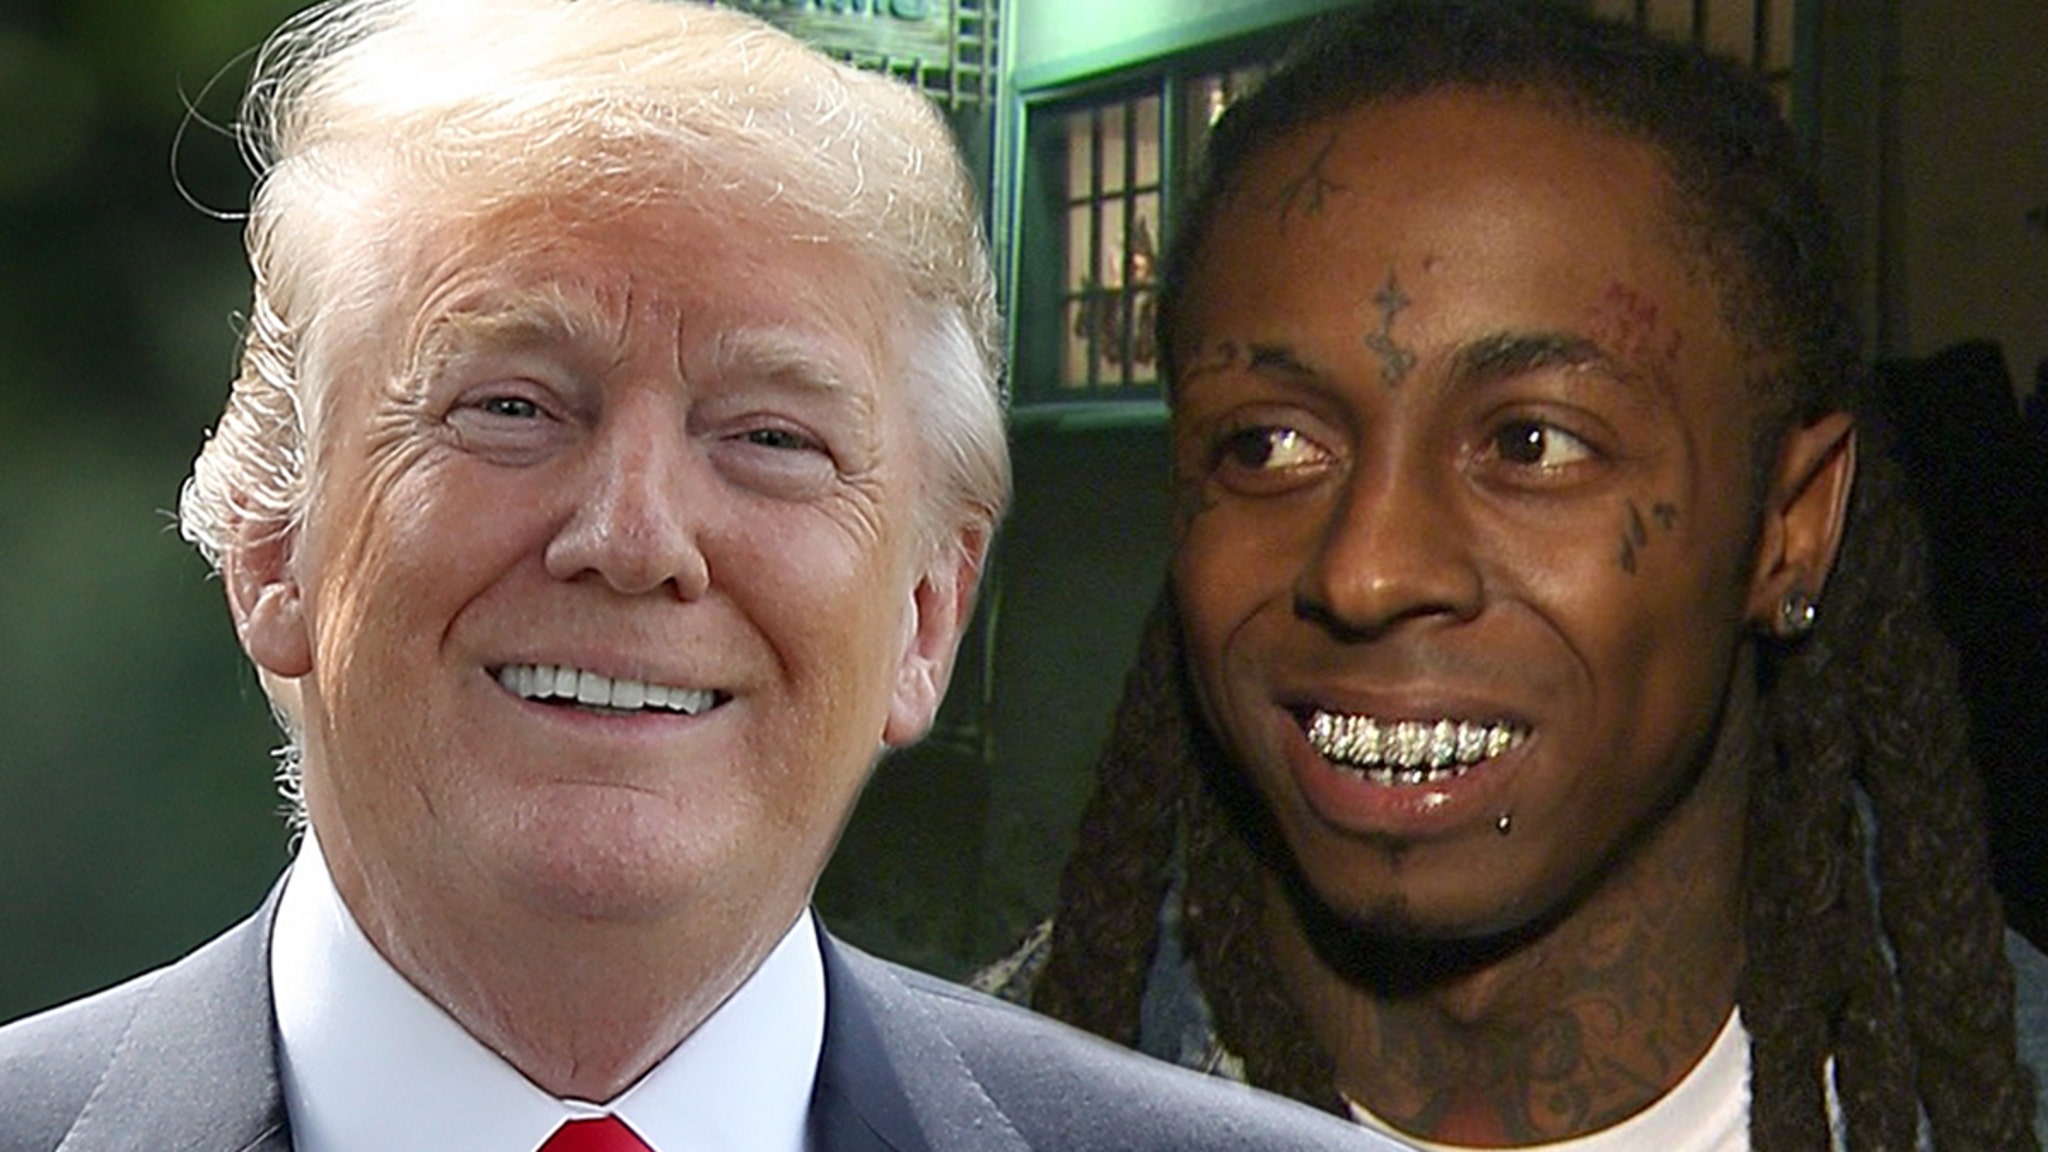 President Trump is expected to forgive Lil Wayne